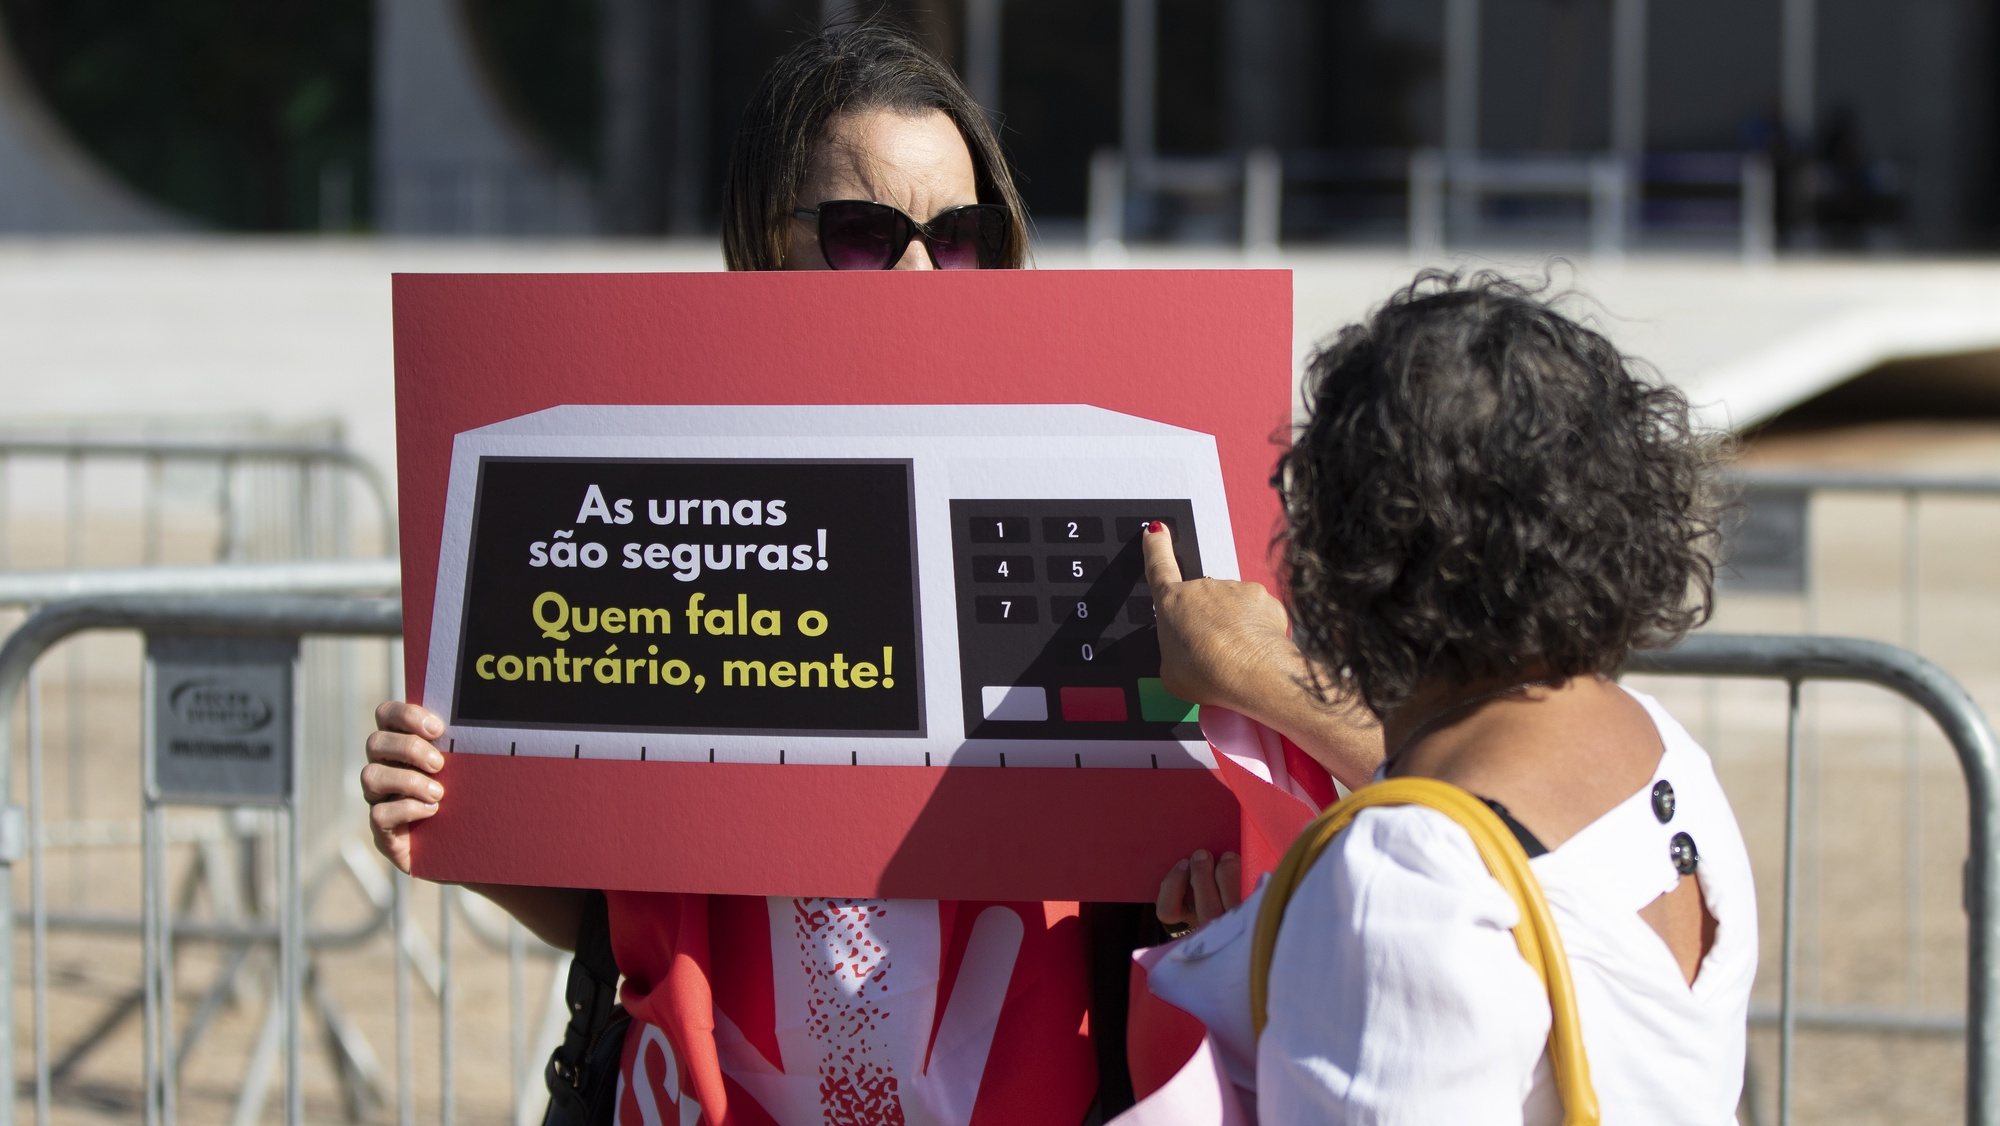 epa10104758 People protest with posters in support of the electoral system in front of the headquarters of the Supreme Court in Brasilia, Brazil, 03 August 2022. This act takes place during the visit by representatives of the Armed Forces who will inspect the source codes of the electronic voting machine in the Multiple Use Room, at the headquarters of the Superior Electoral Court (TSE).  EPA/Joedson Alves